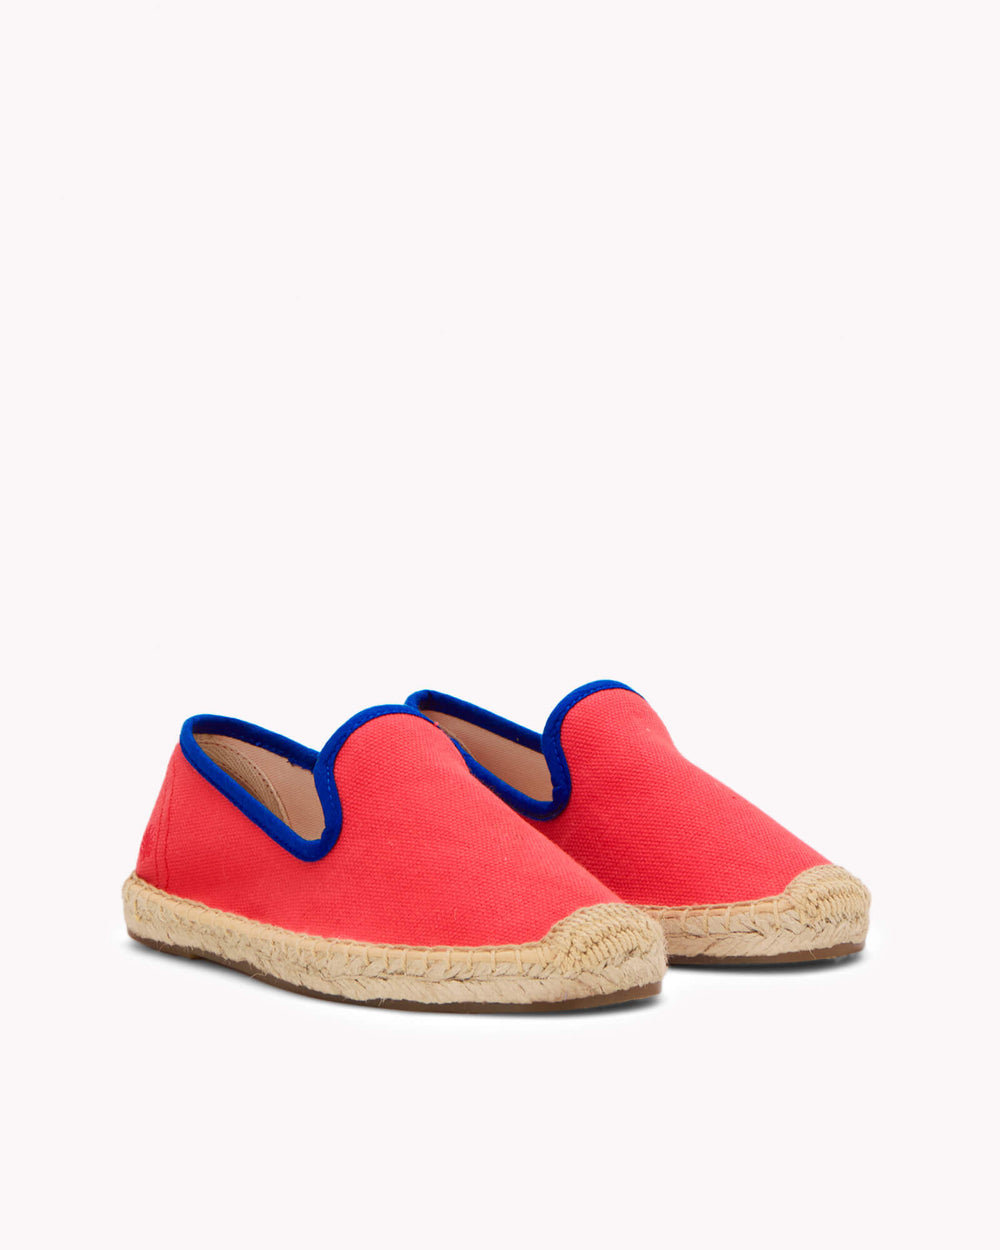 Kids red espadrille shoes with navy piping on gray background